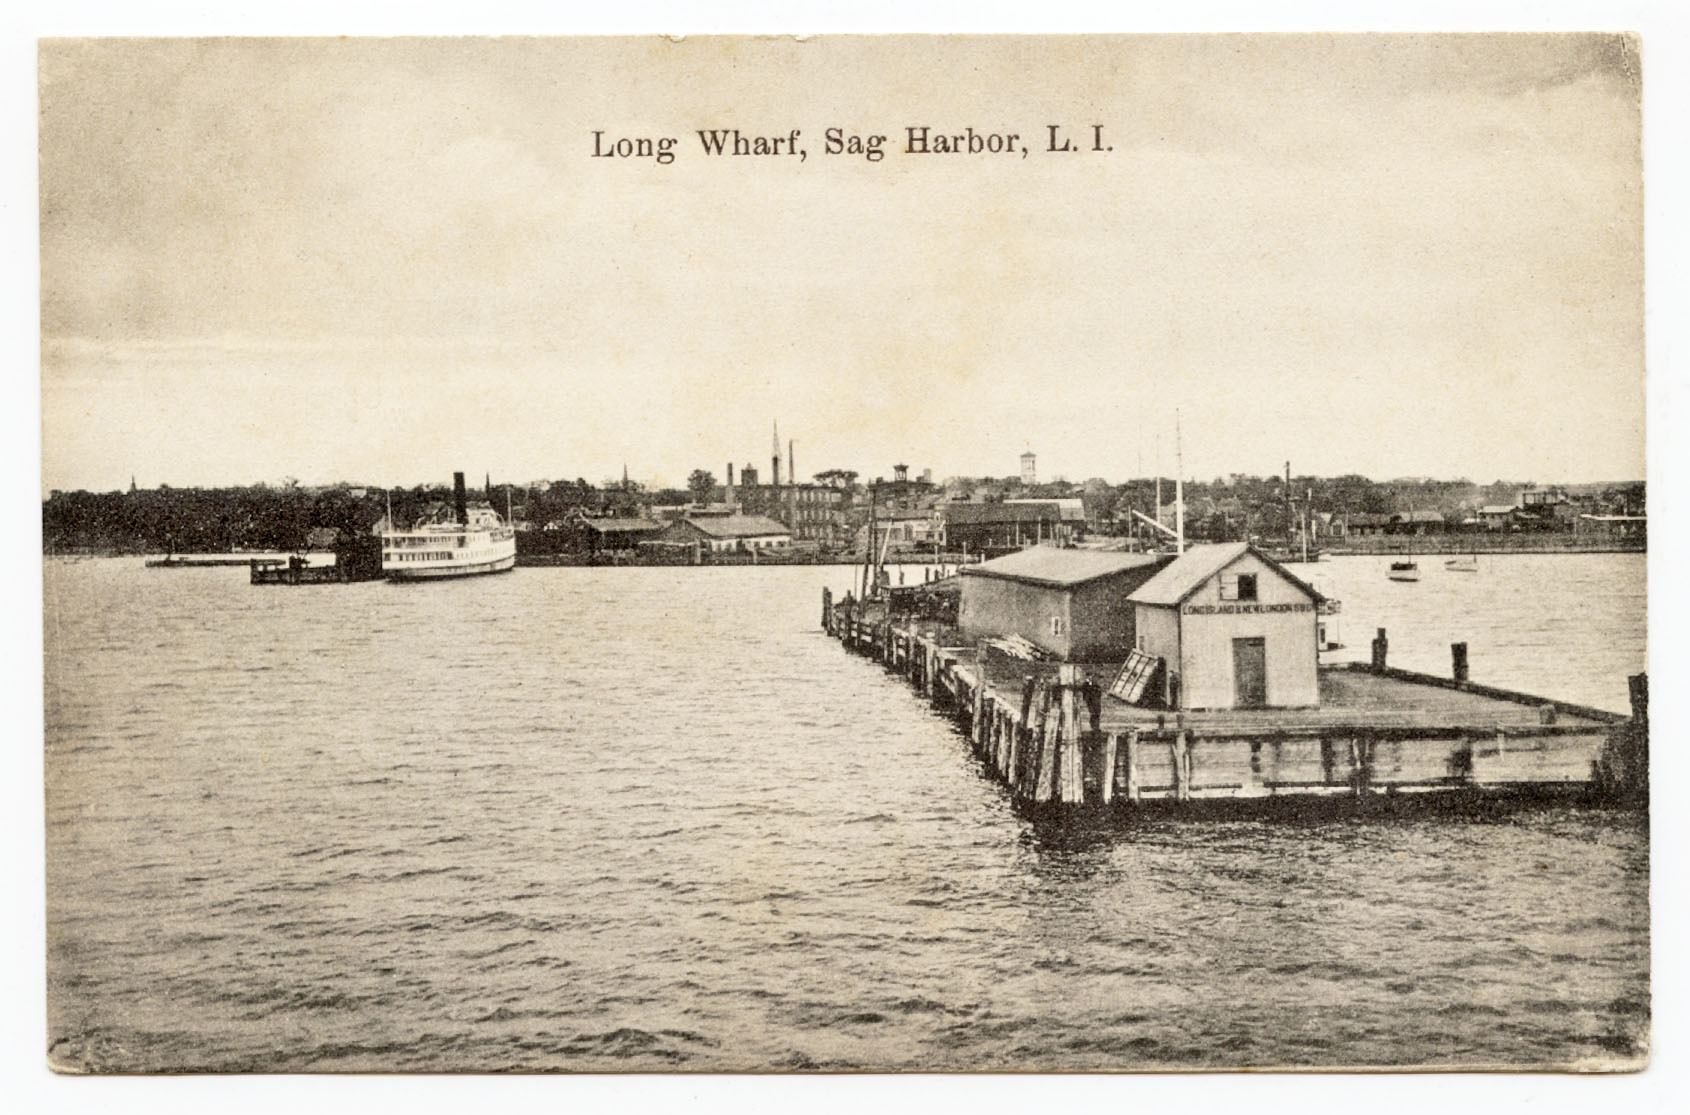 A 1910 postcard showing Long Wharf from the water with Maidstone Pier at left.